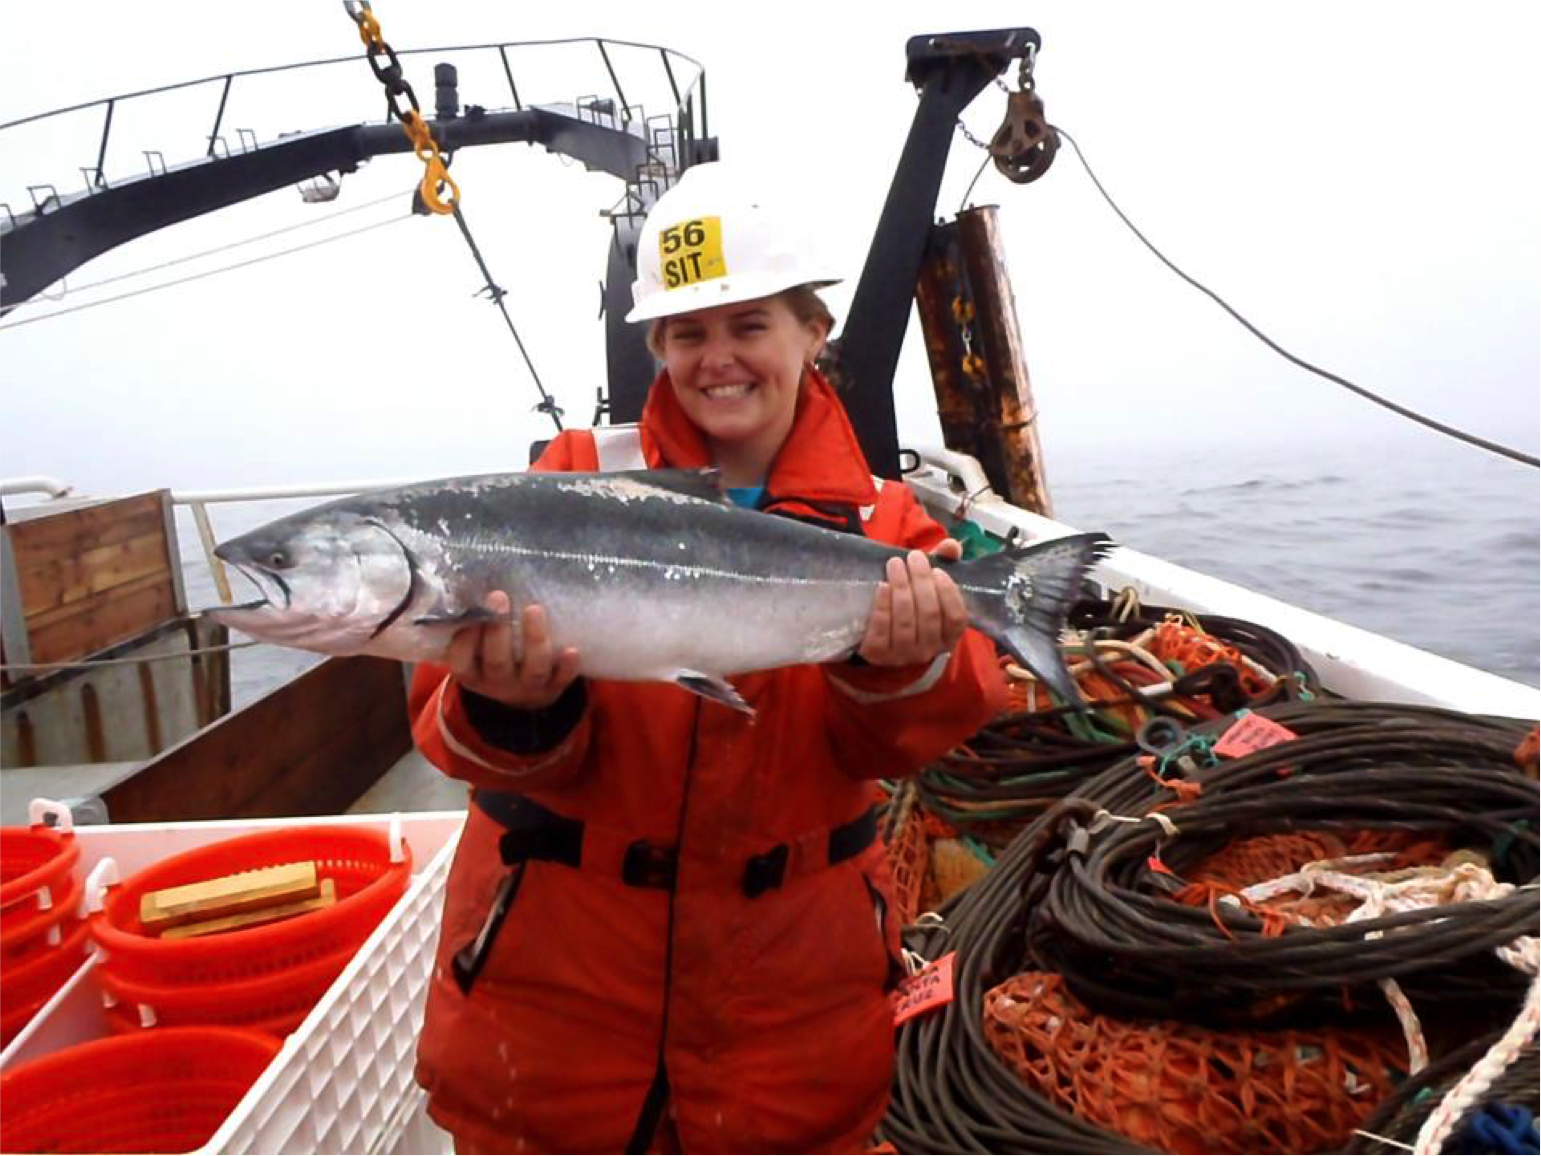 Kate Dubickas during her June 2012 NOAA Hollings internship with the Southwest Fisheries Science Center Fisheries Ecology Division. Here she stands aboard the R/V Ocean Starr, somewhere in the California Current off the coast of Northern California, holding a Chinook salmon.